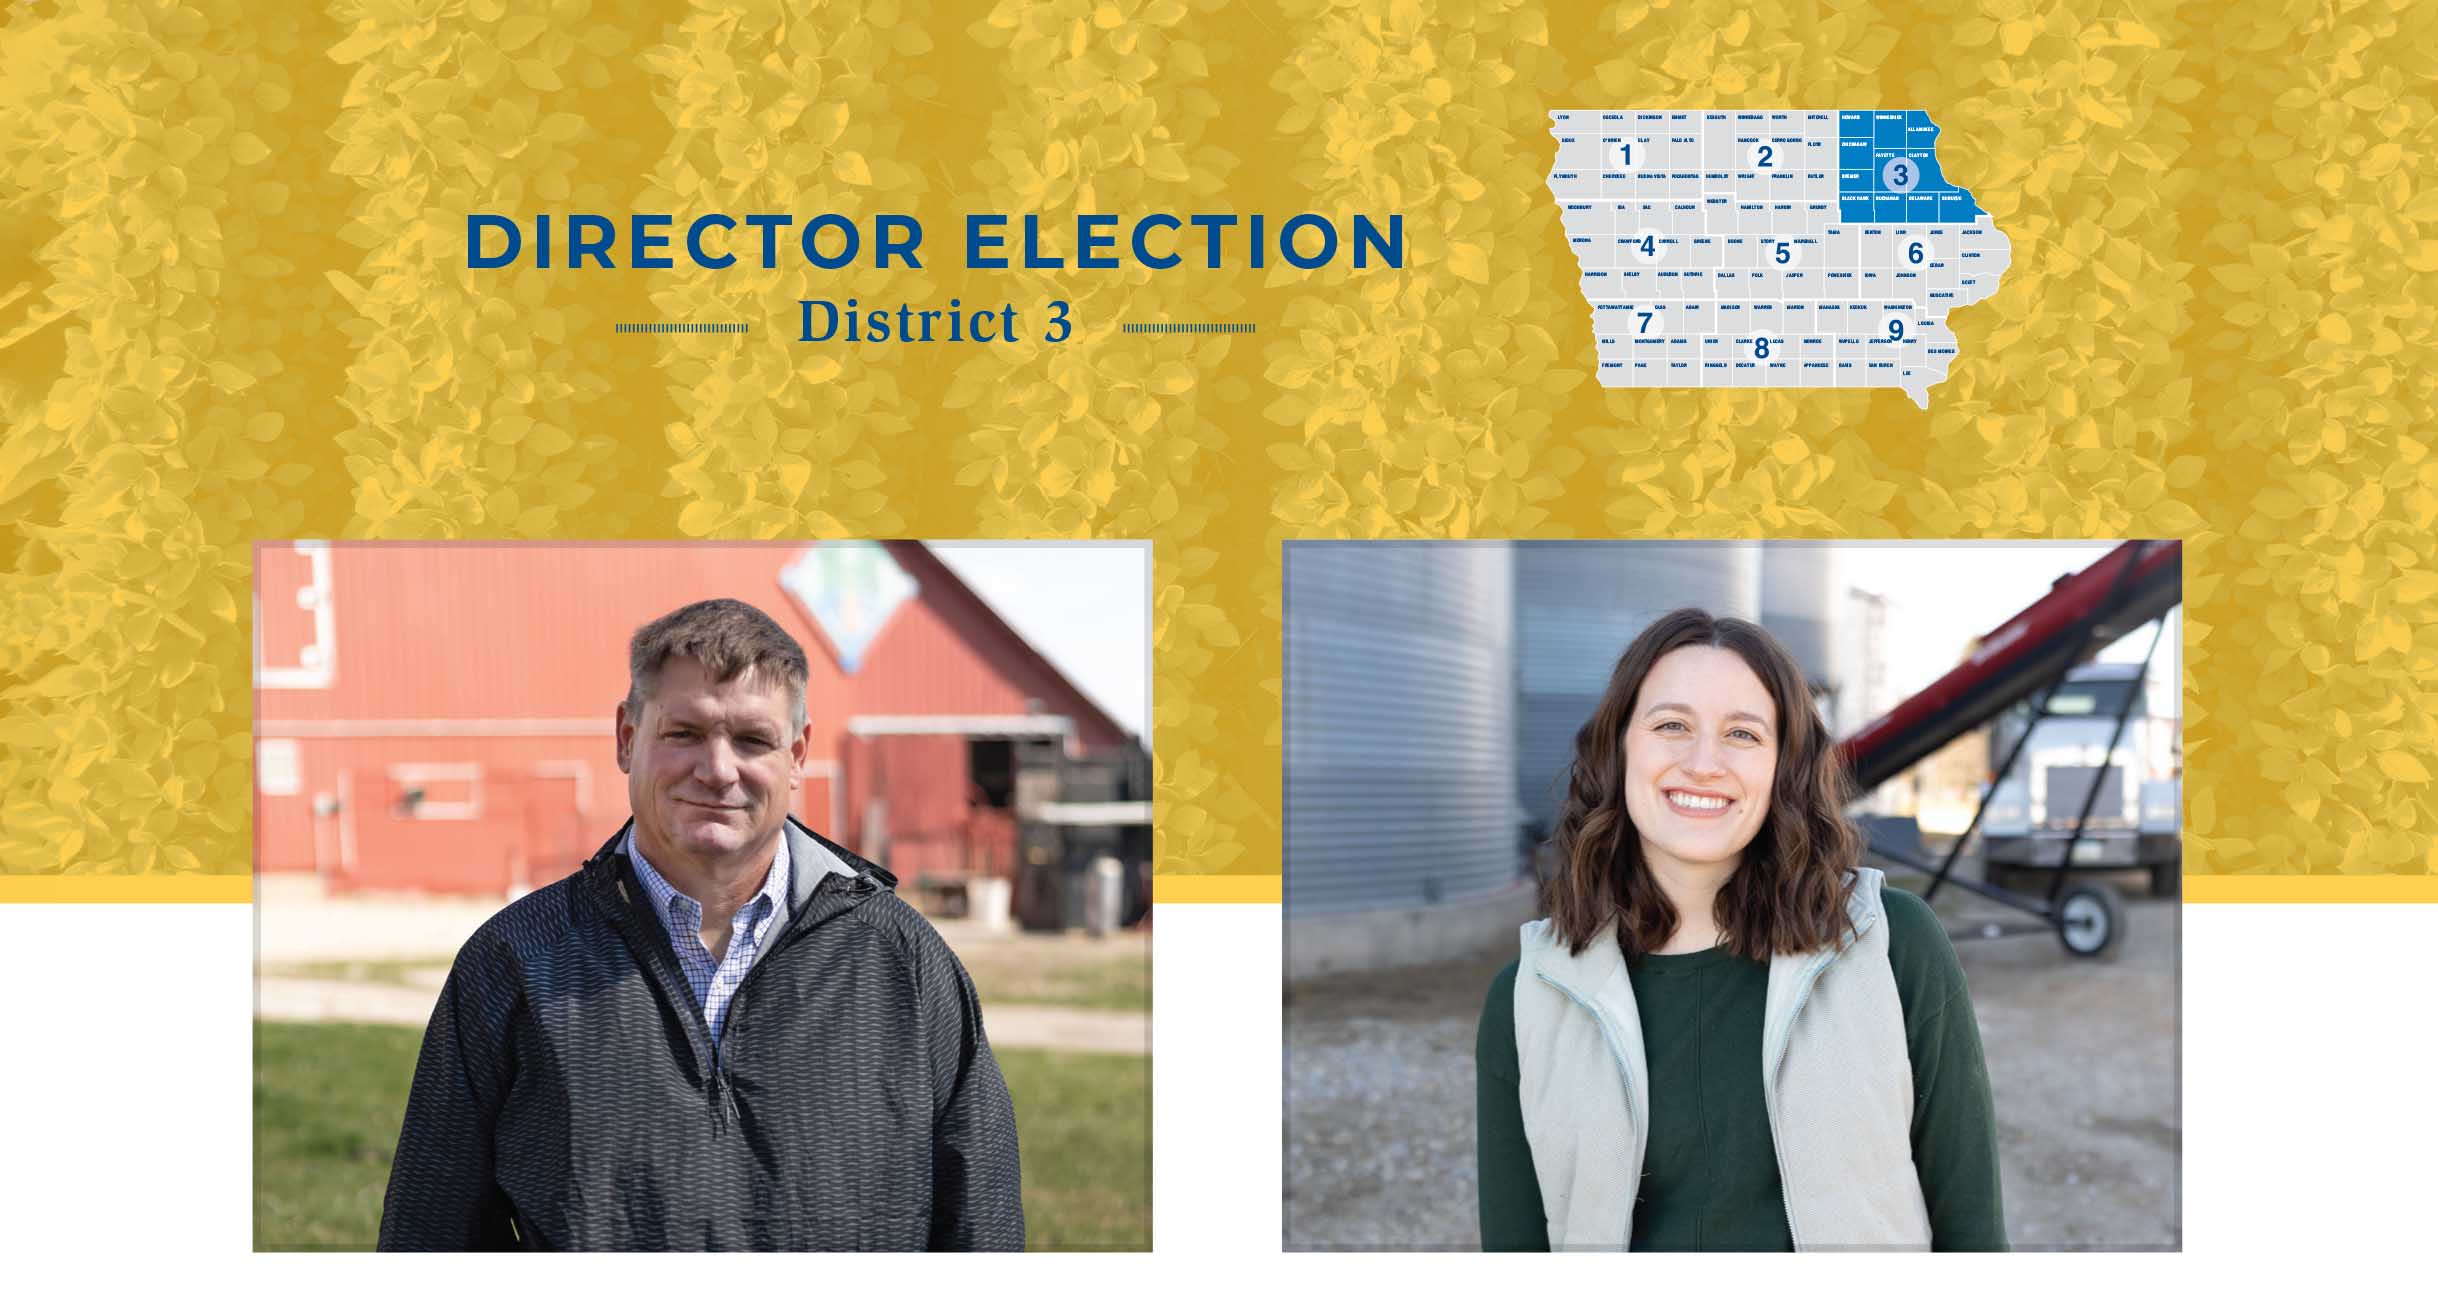 Farmers running for District 3